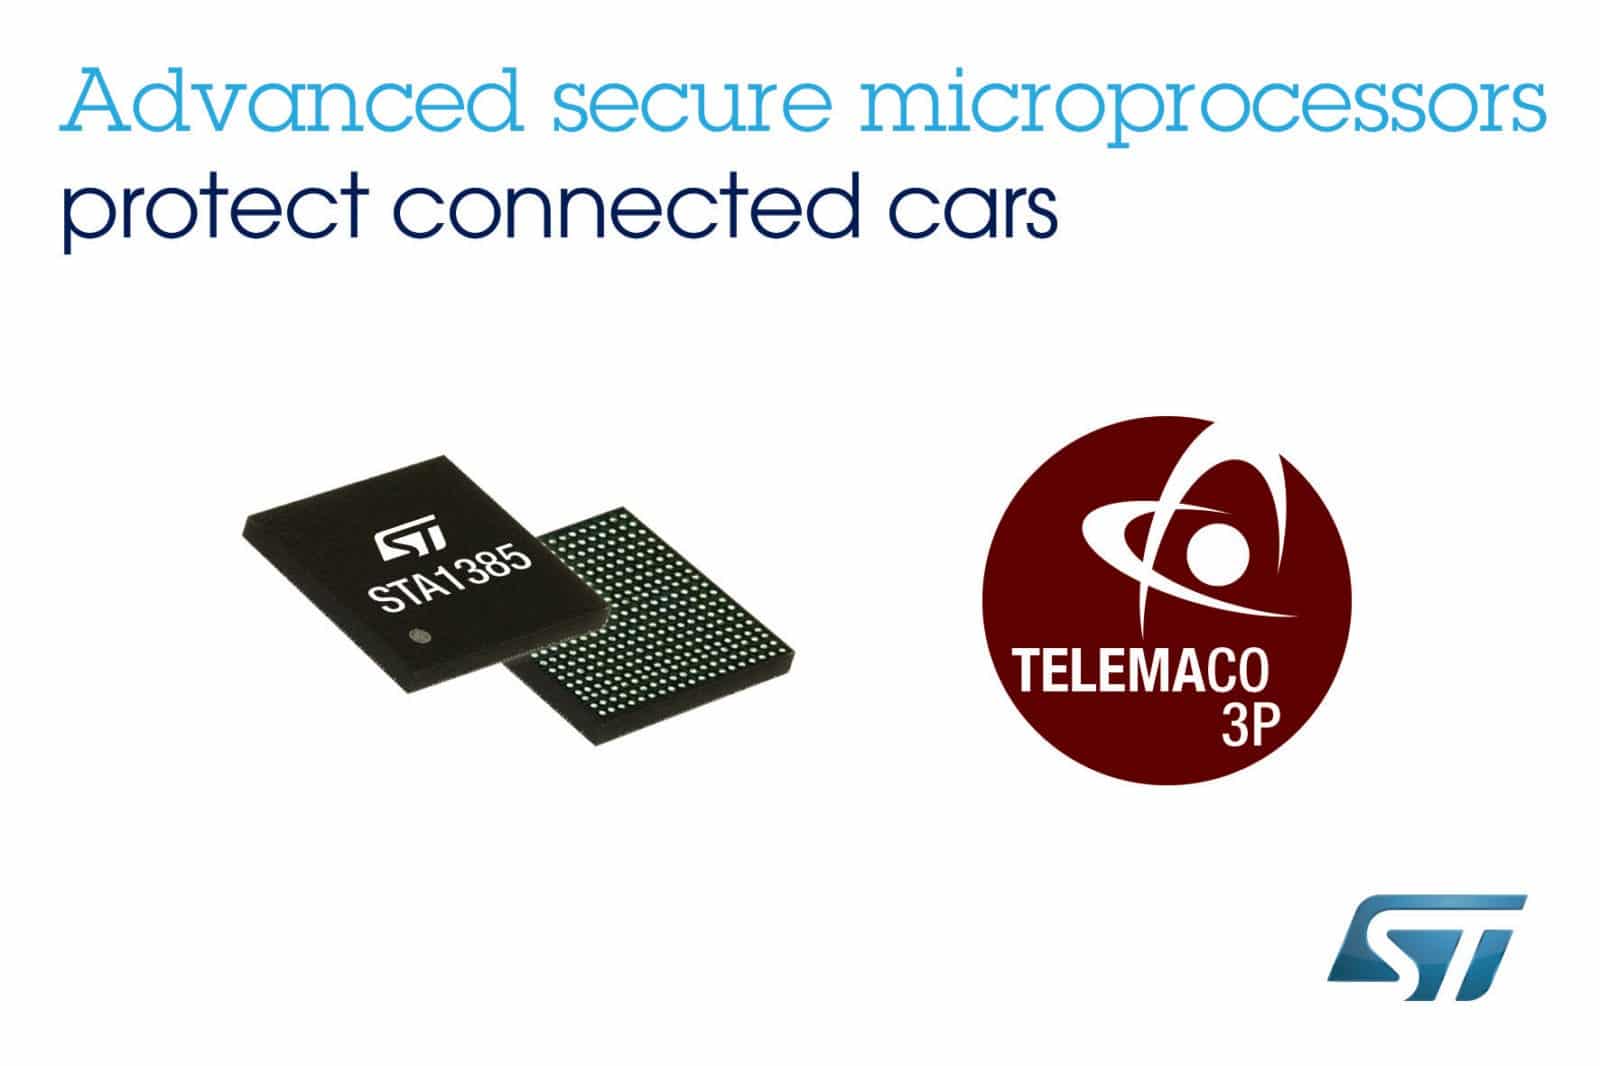 Security In Connected Cars Gets Into Gear With New Processors